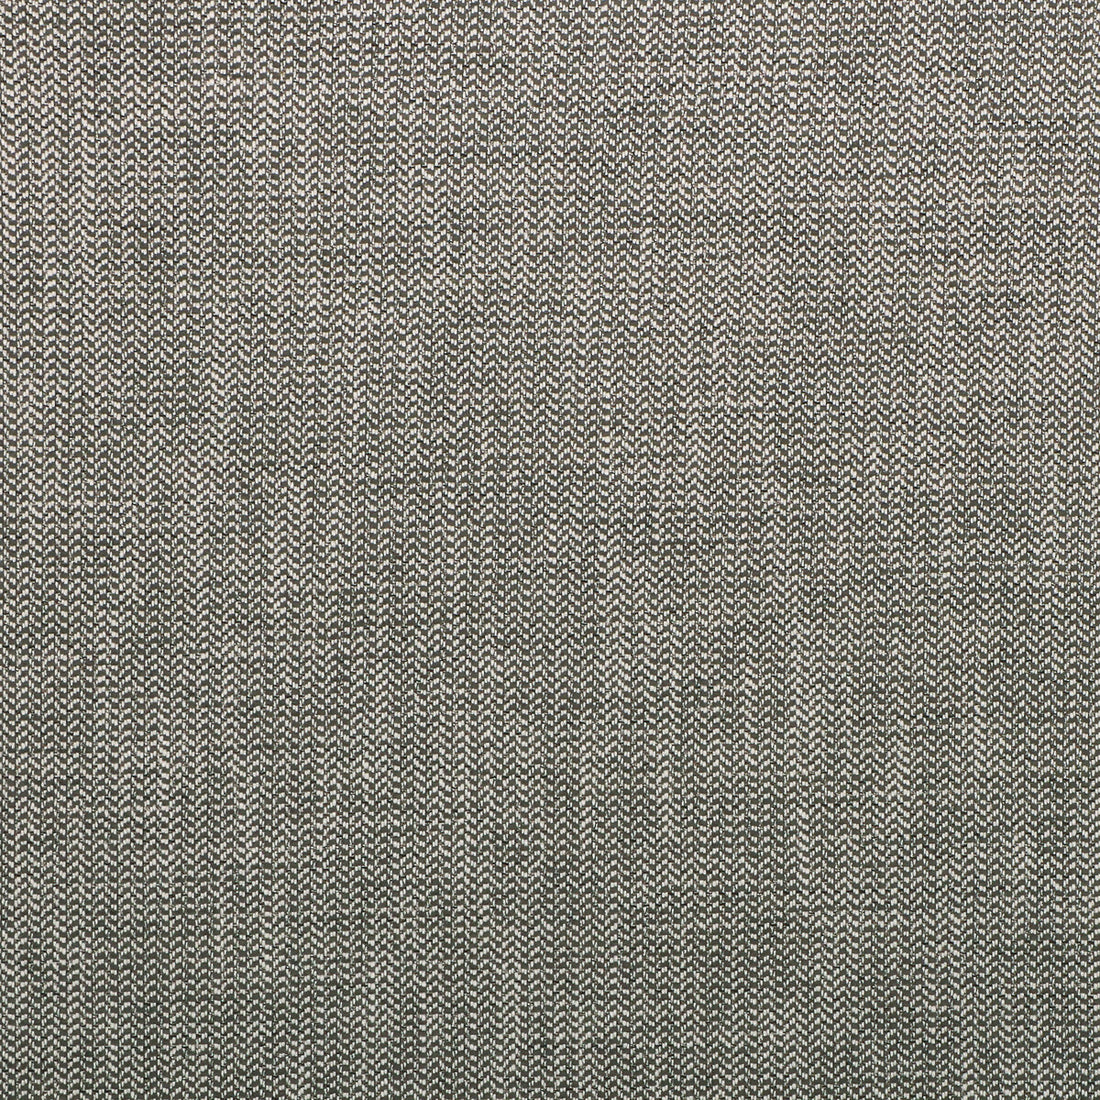 Kravet Smart fabric in 35514-21 color - pattern 35514.21.0 - by Kravet Smart in the Inside Out Performance Fabrics collection